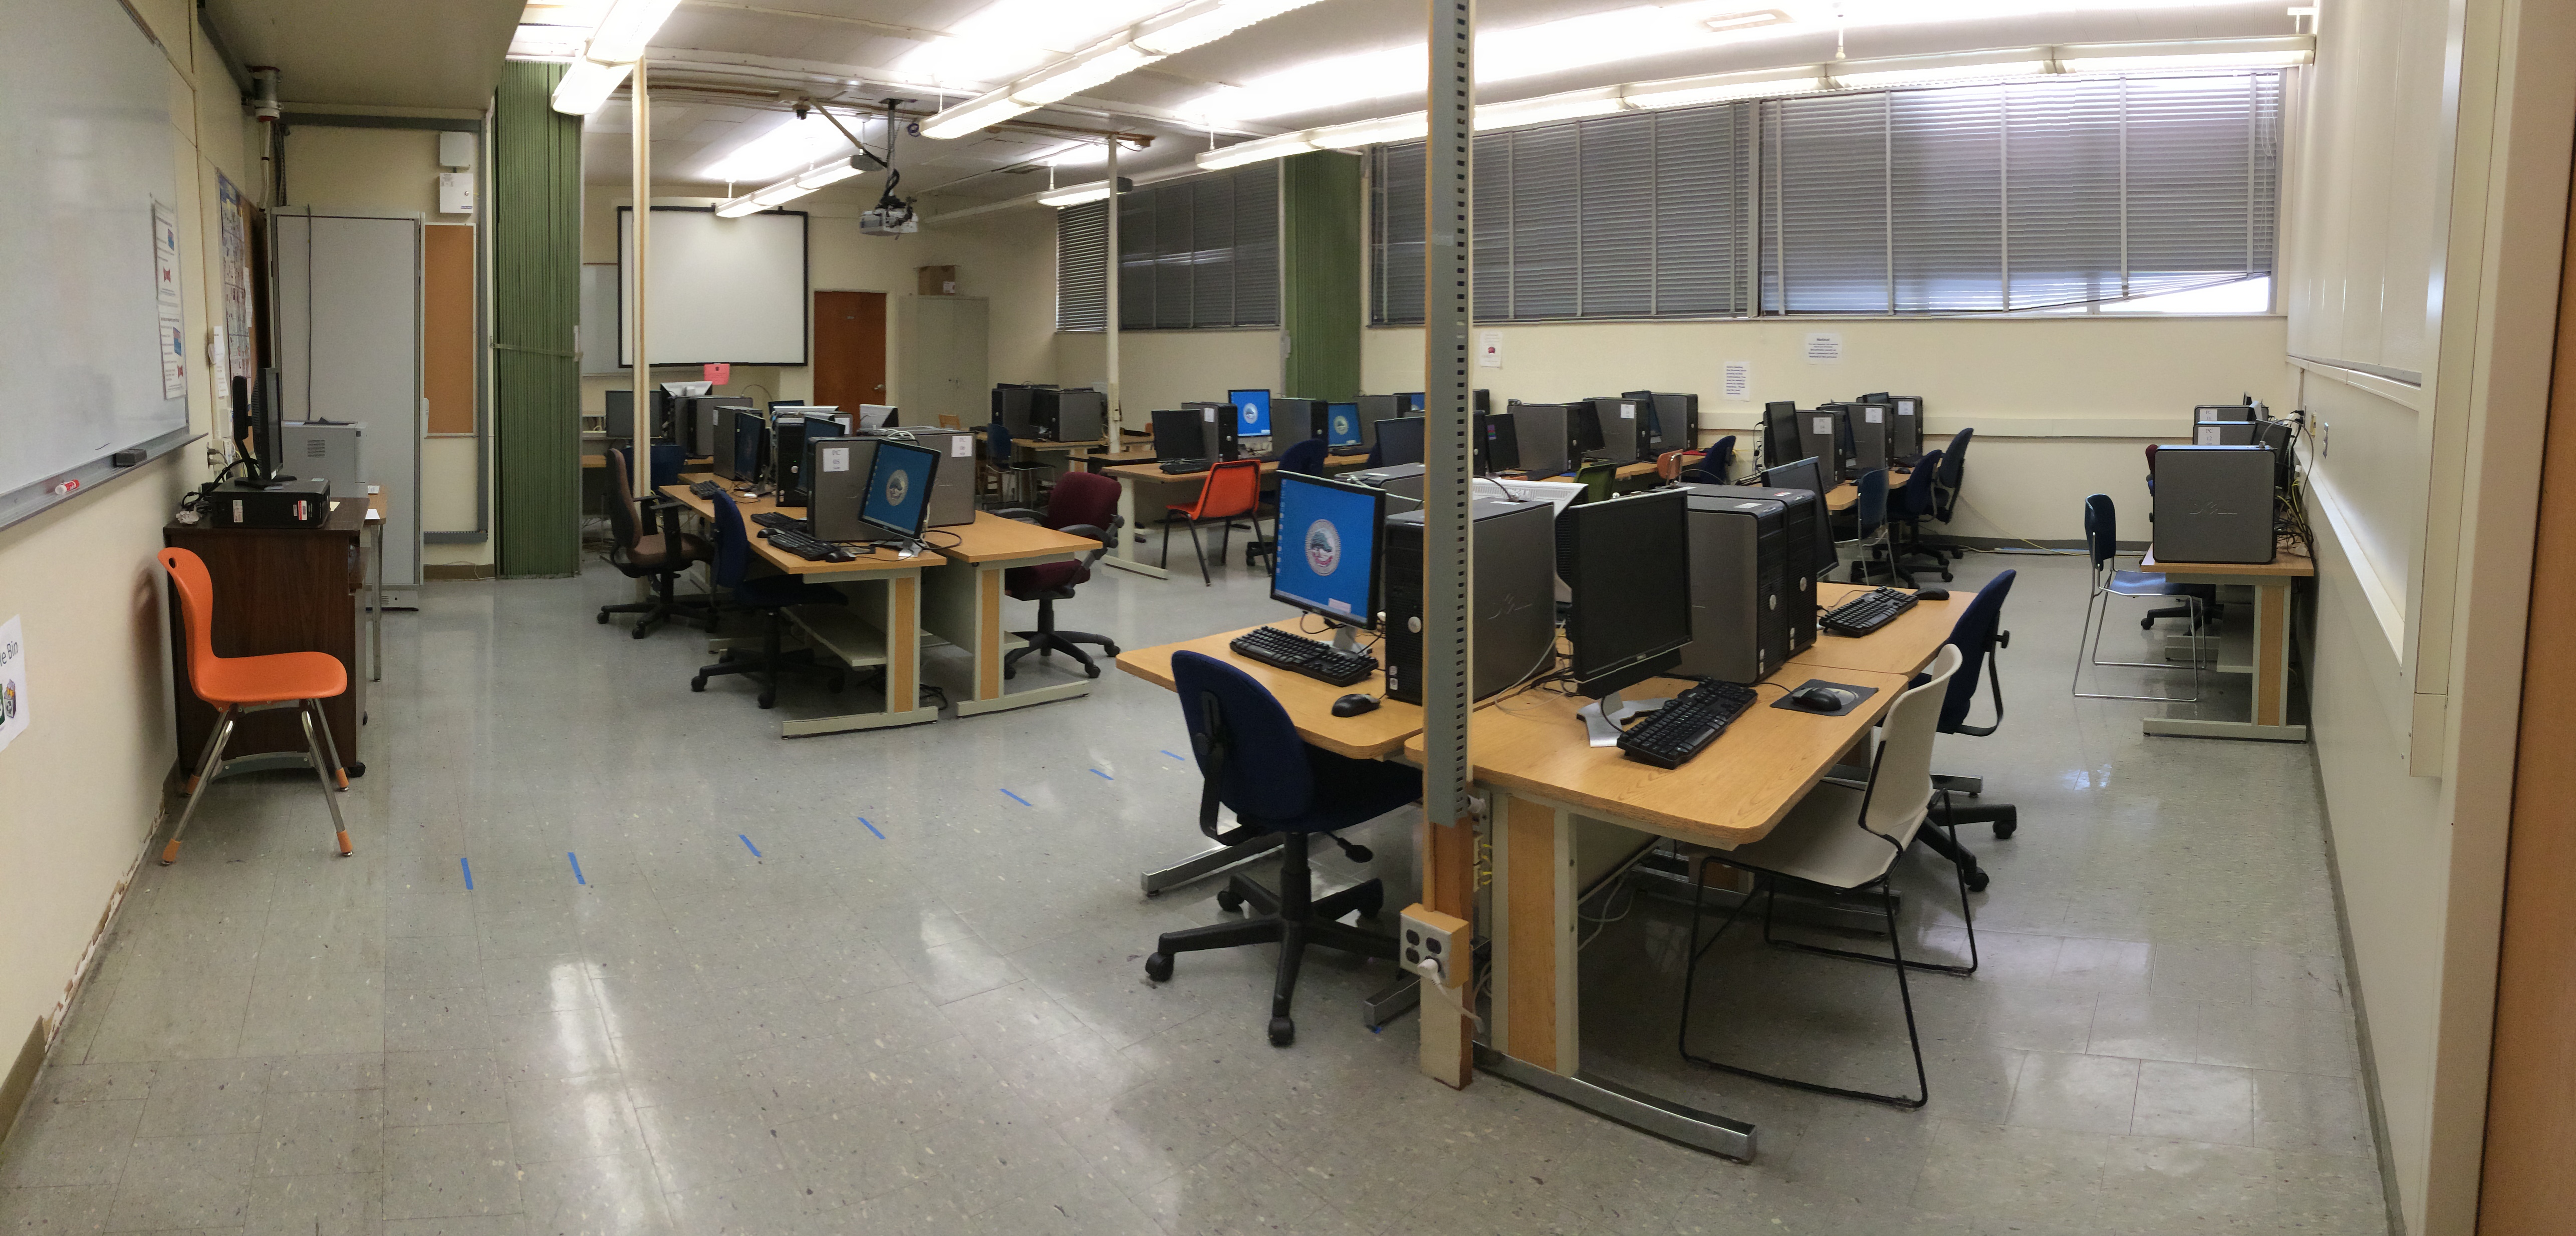 Computers and tables lined up in the lab